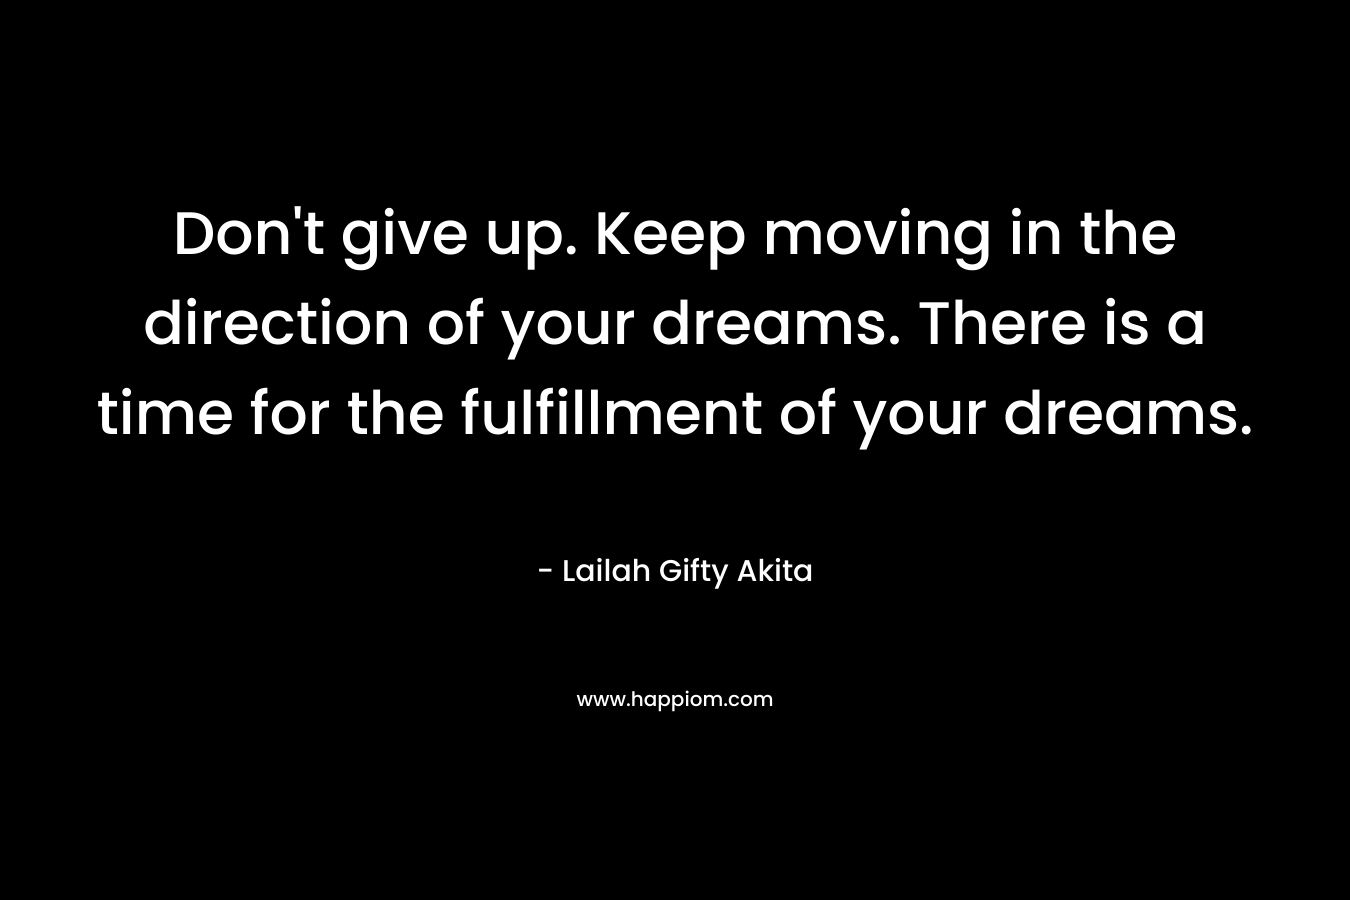 Don’t give up. Keep moving in the direction of your dreams. There is a time for the fulfillment of your dreams. – Lailah Gifty Akita